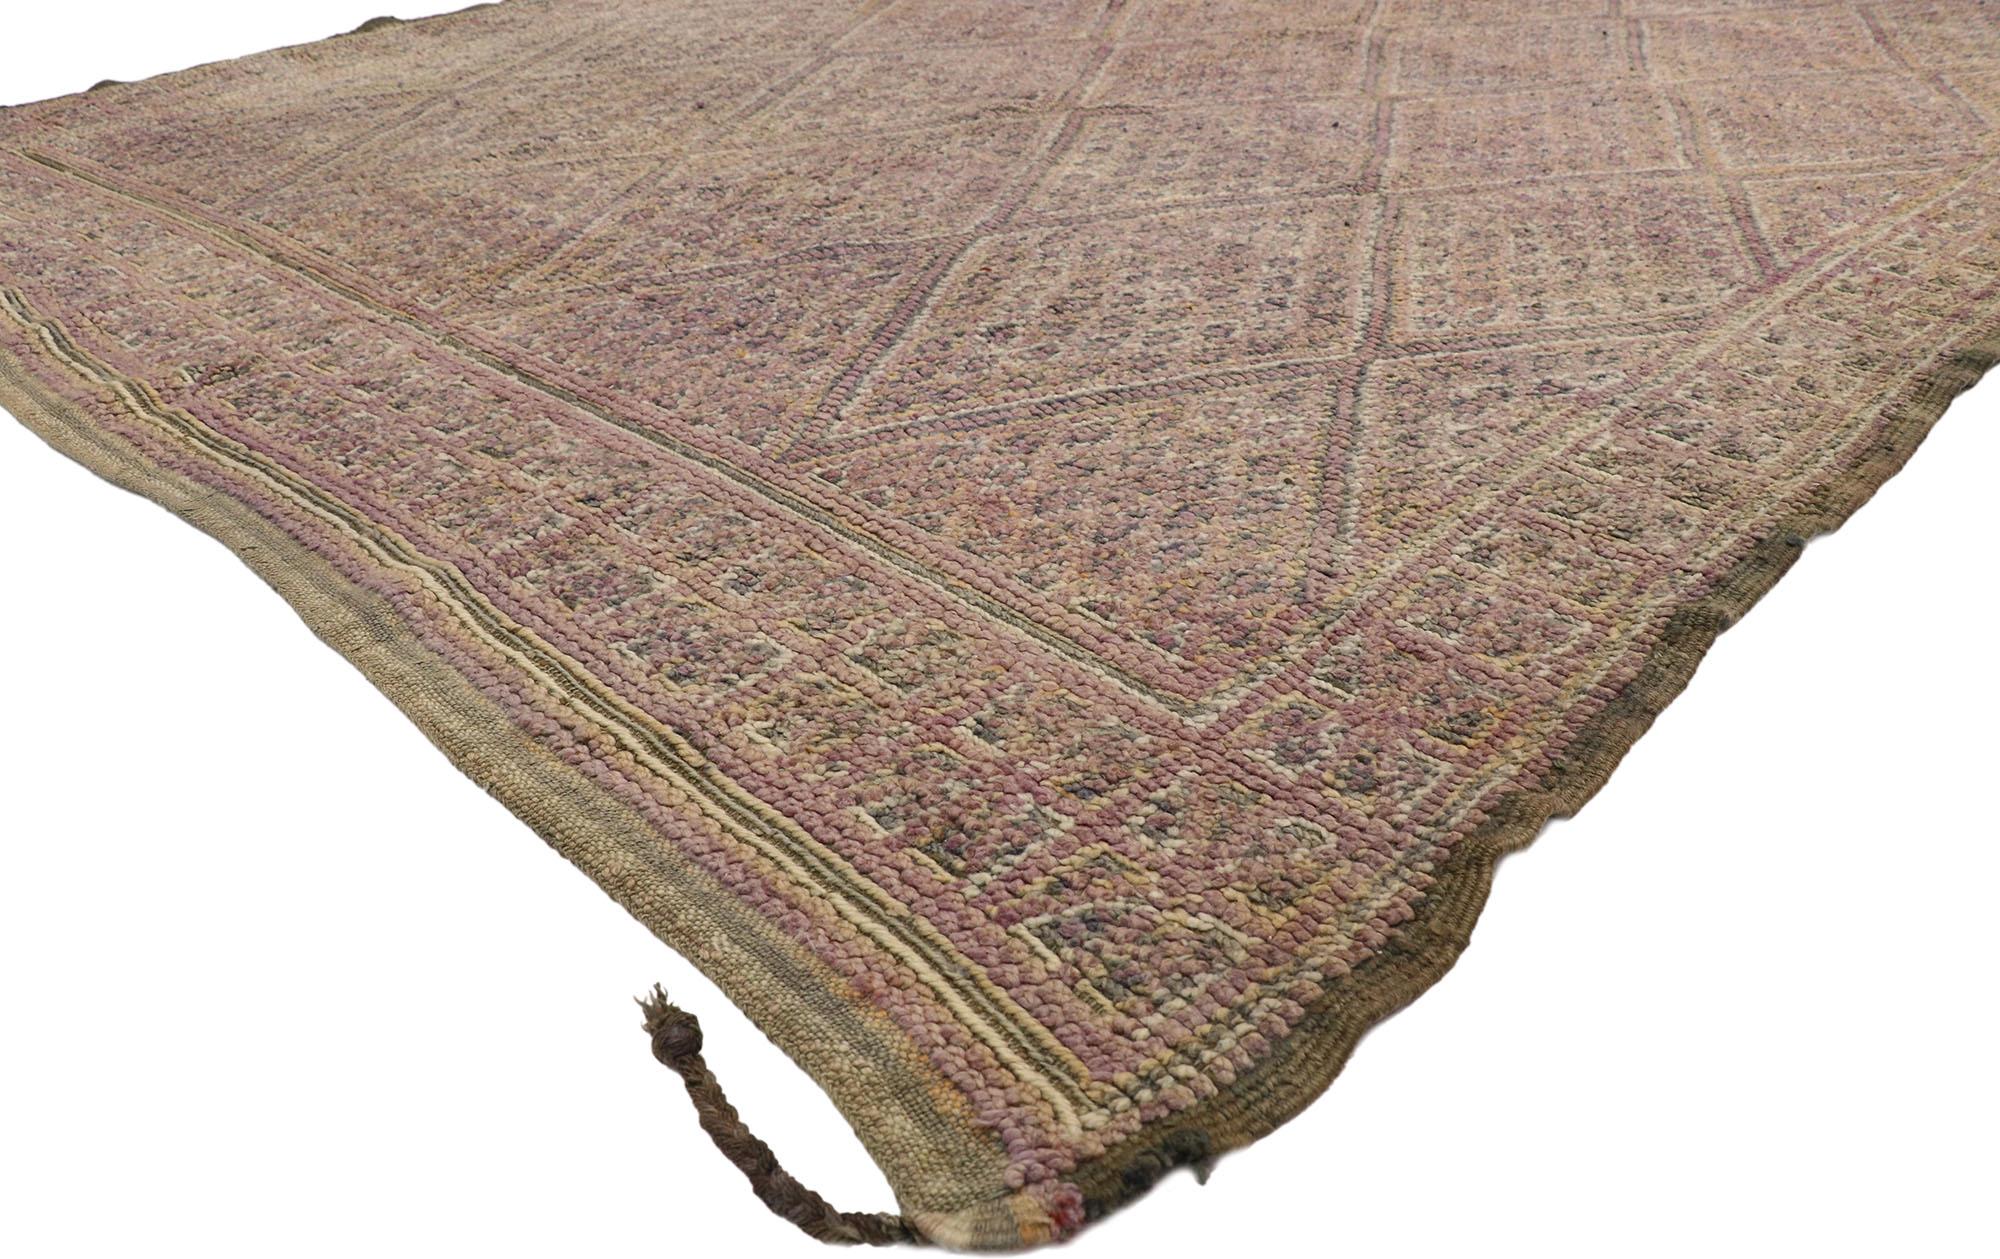 20985, vintage Berber Moroccan Zayane rug with Bohemian style and Hygge Vibes. This hand knotted wool vintage Berber Moroccan Zayane rug features an all-over diamond lattice pattern composed of smaller concentric lozenges spread across the abrashed